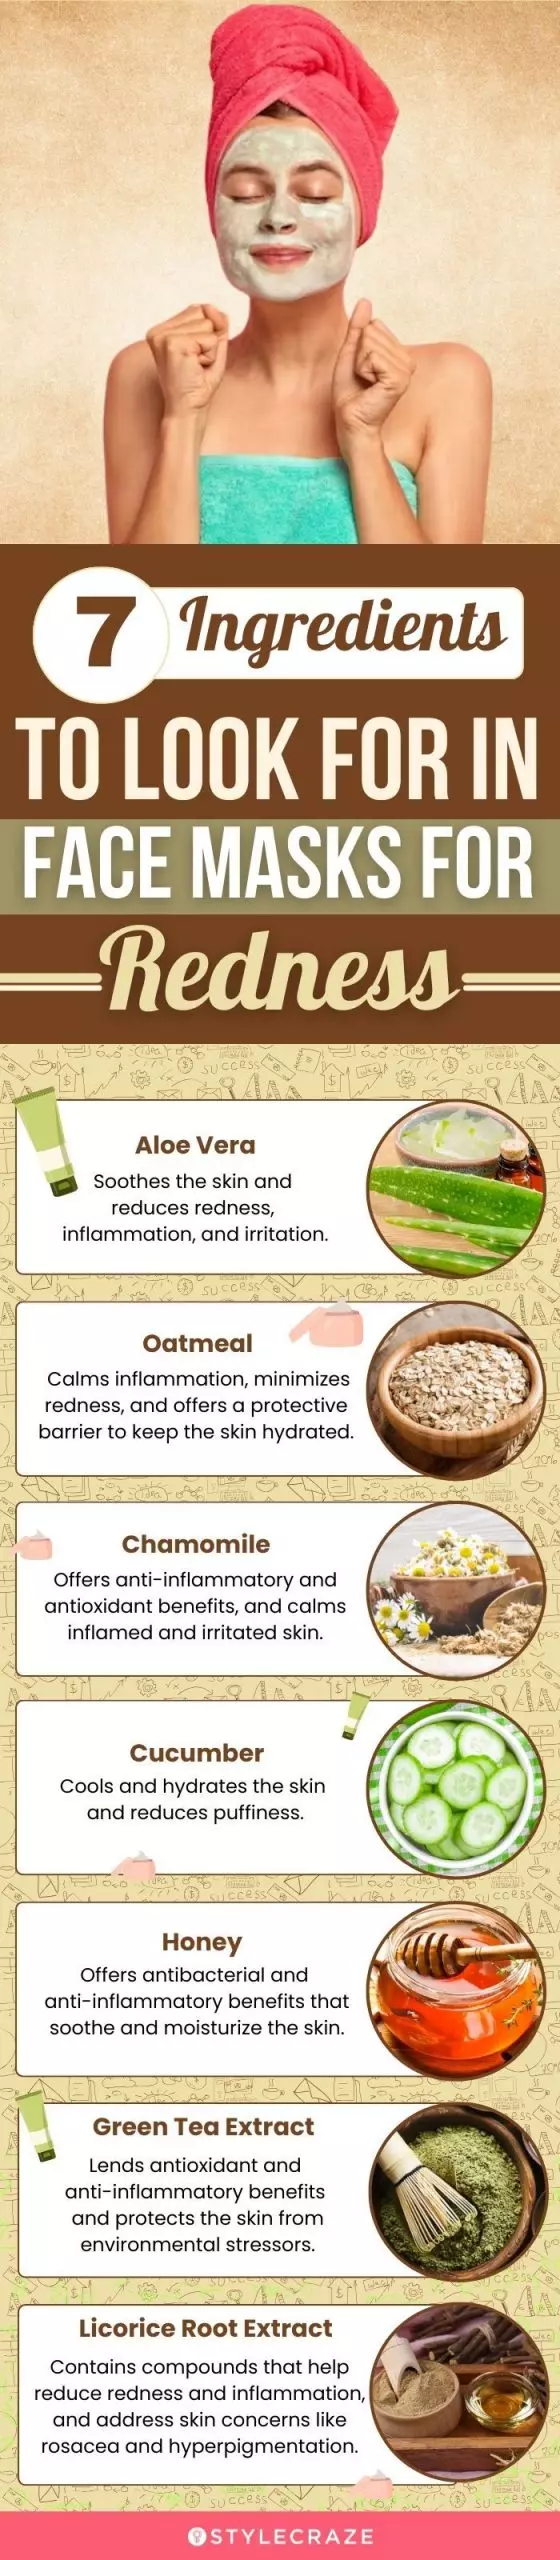 7 Ingredients To Look For In Face Masks For Redness (infographic)